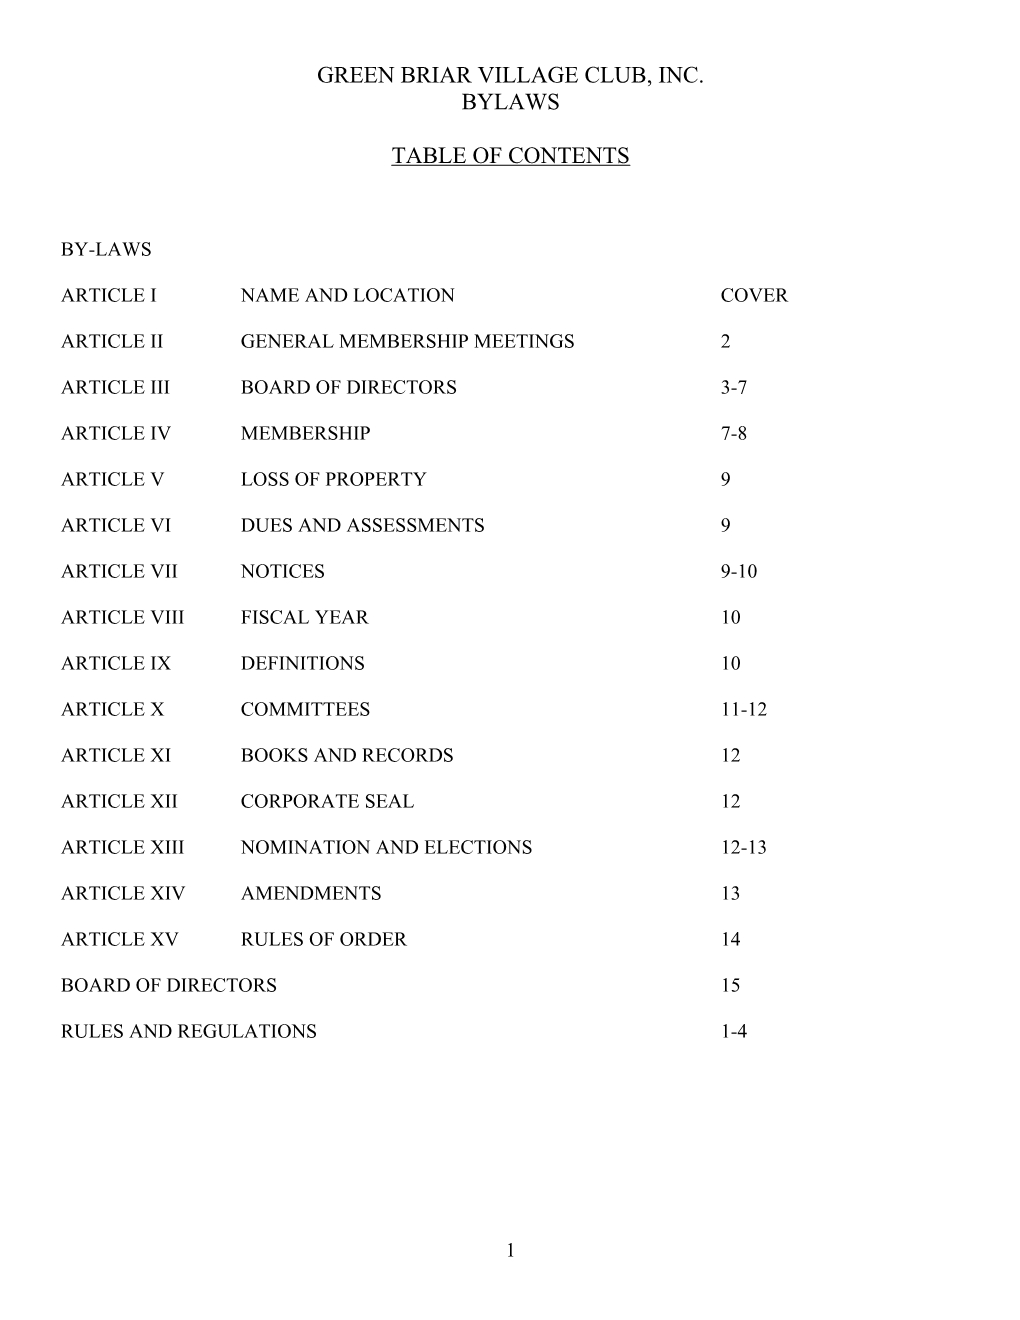 Table of Contents s311